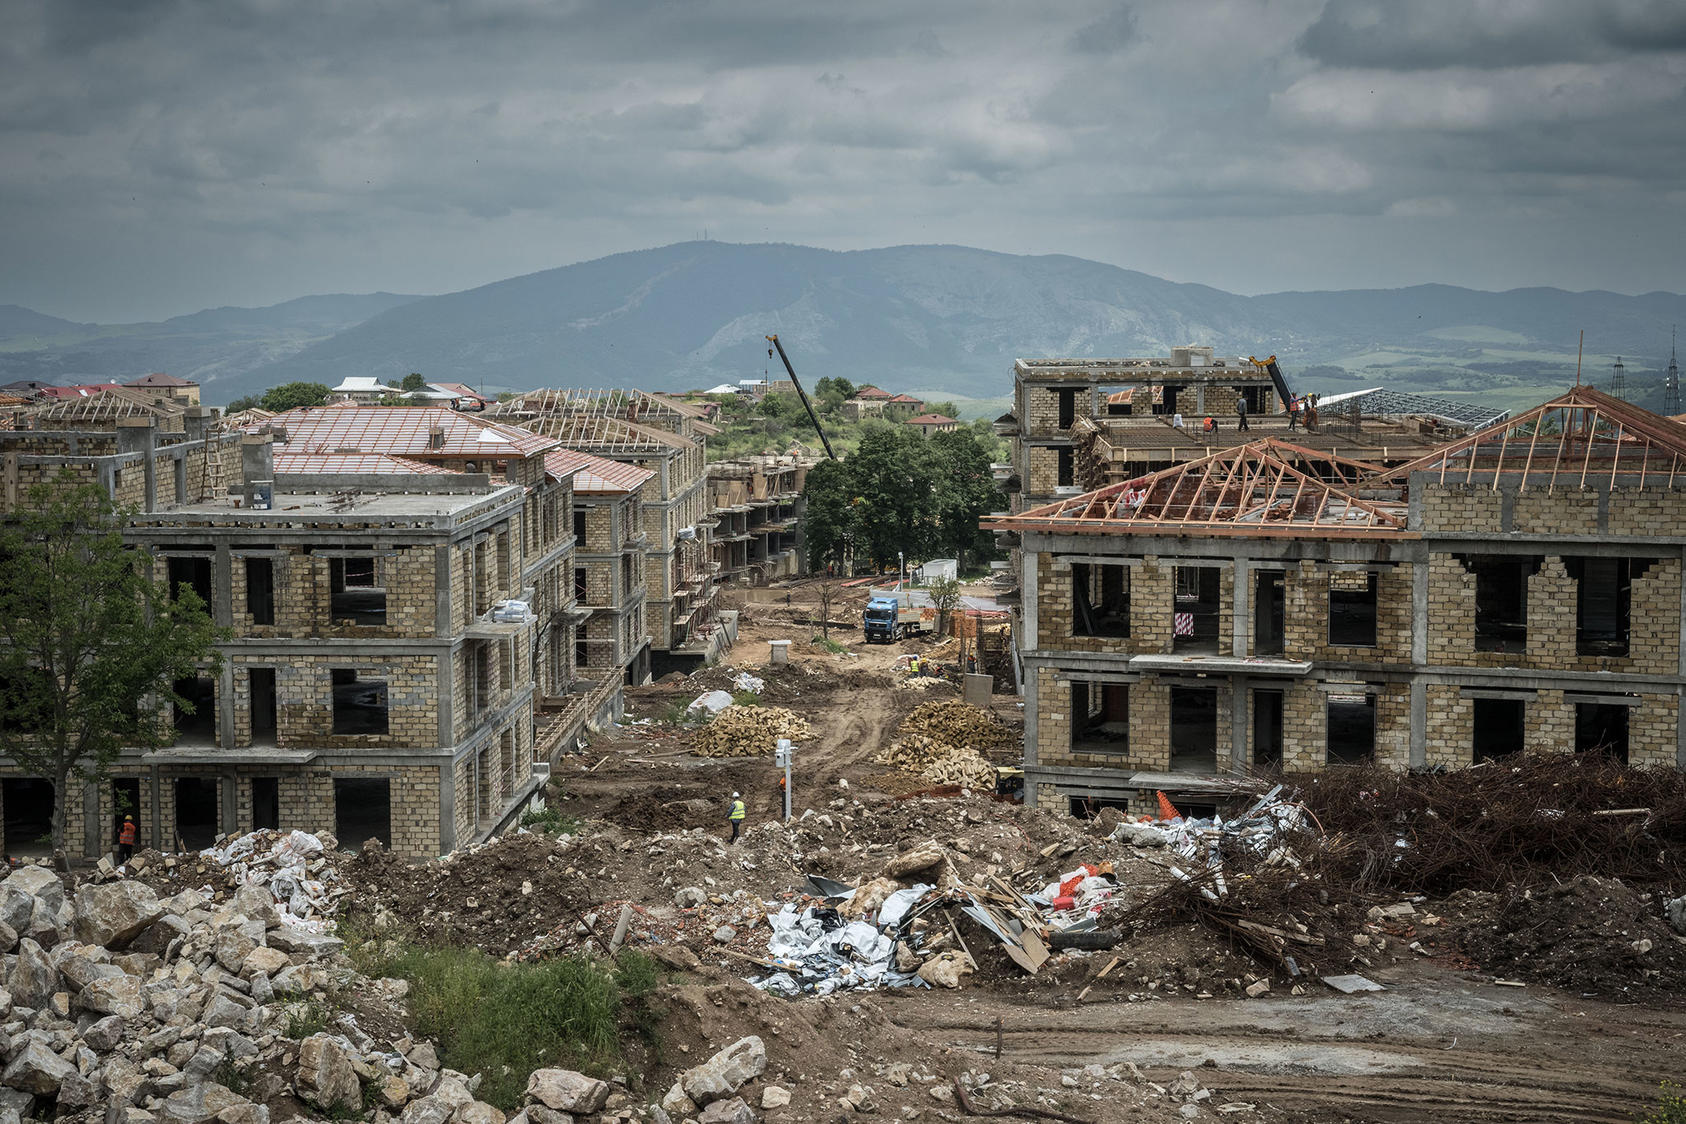 Construction in Shusha, a town in the disputed Nagorno-Karabakh region regarded by both Armenians and Azerbaijanis as central to their national identities. June 17, 2023. (Sergey Ponomarev/The New York Times)